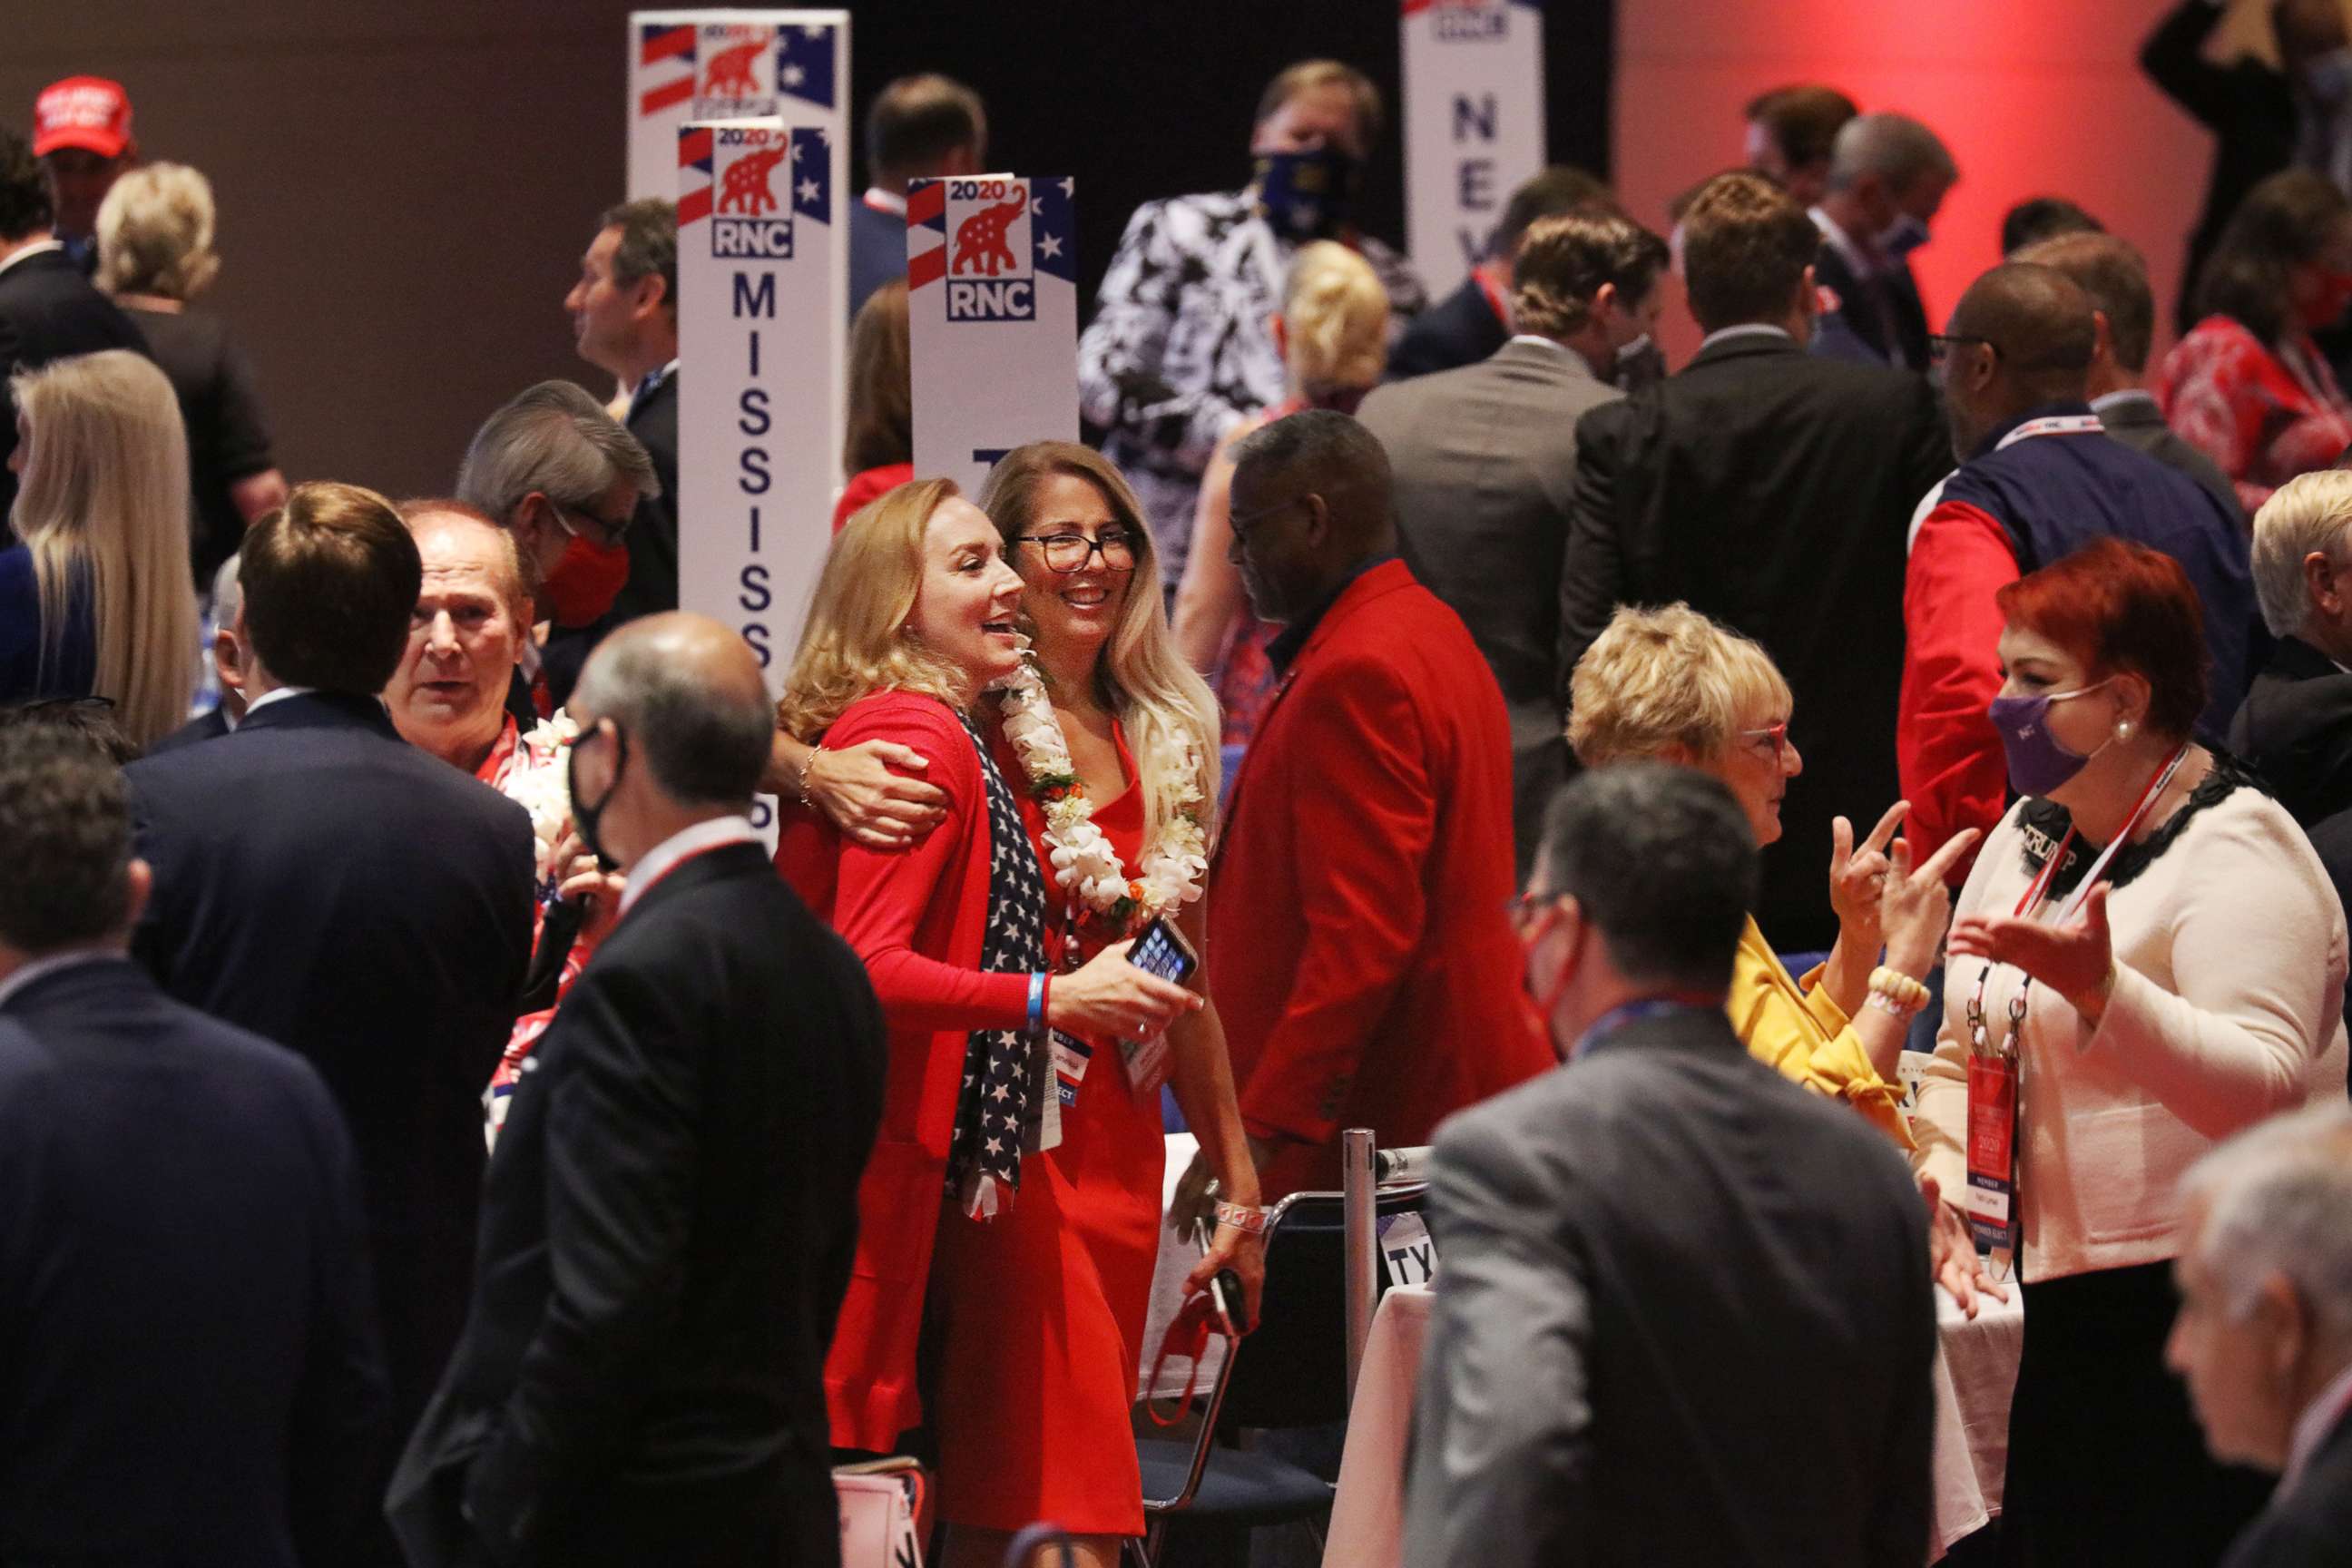 PHOTO: People mingle at the conclusion of President Trump's speech to delegates on the first day of the Republican National Convention at the Charlotte Convention Center on Aug. 24, 2020, in Charlotte, N.C.